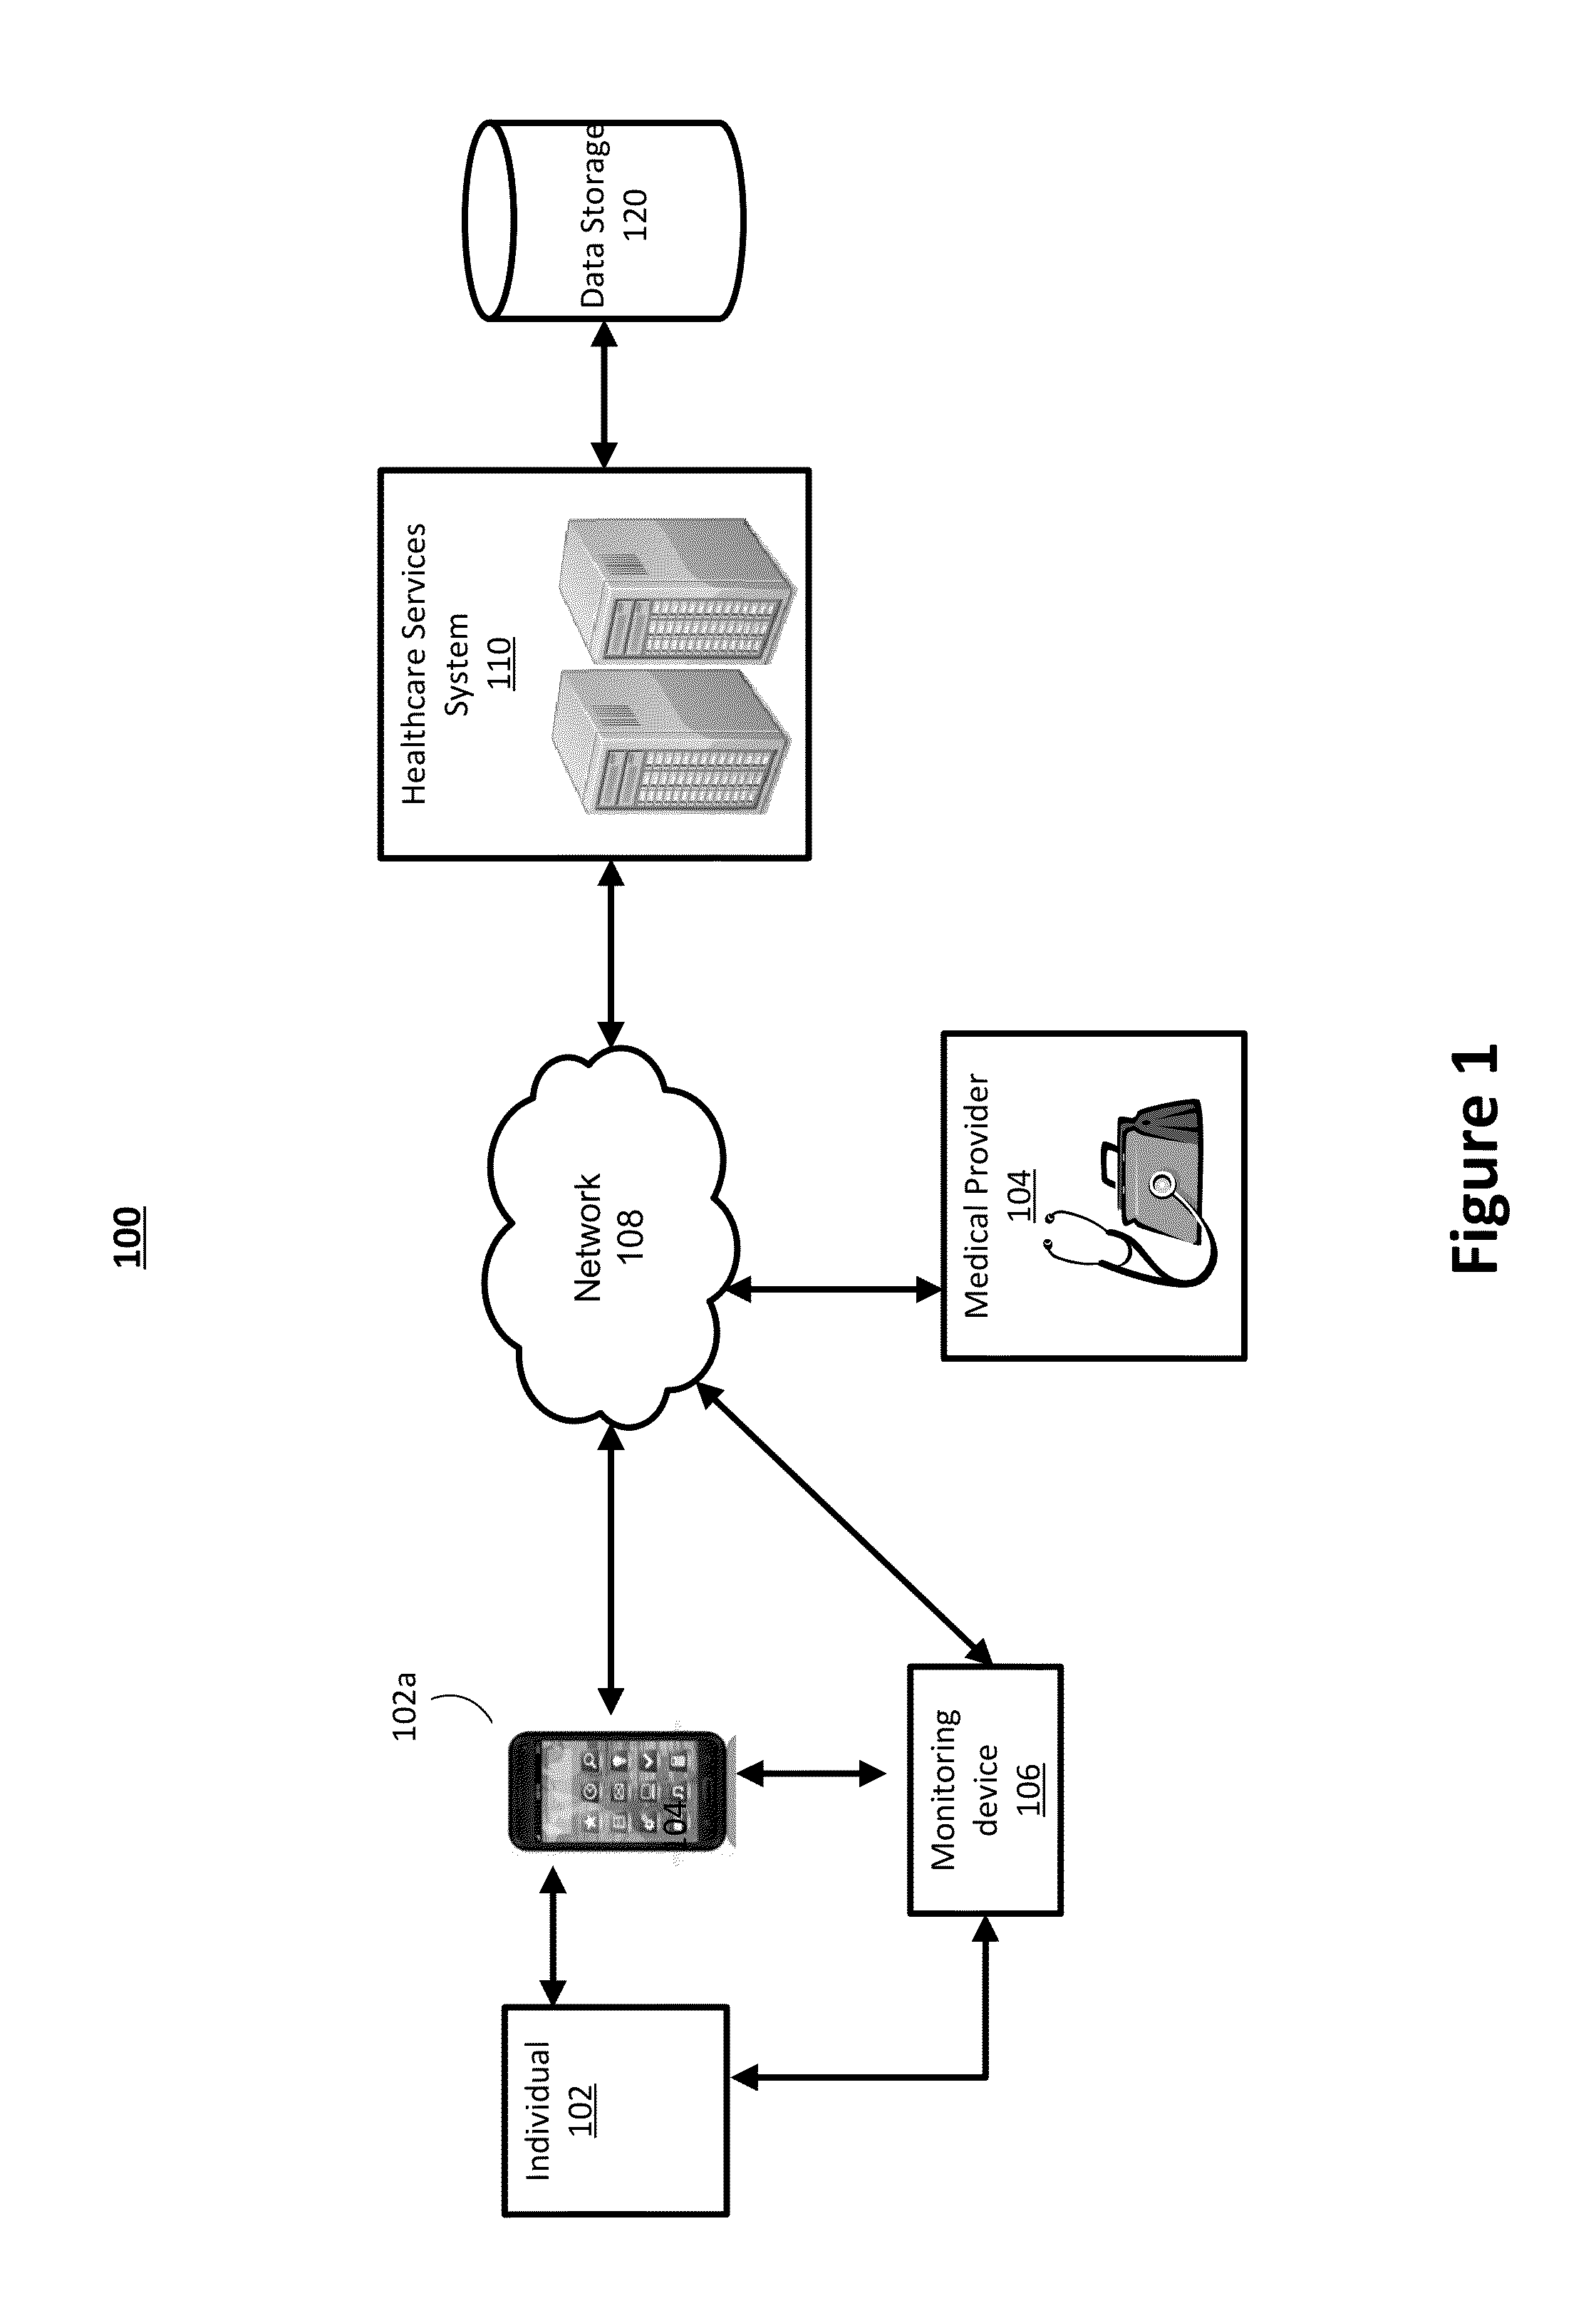 System for and Method of Providing Healthcare Services